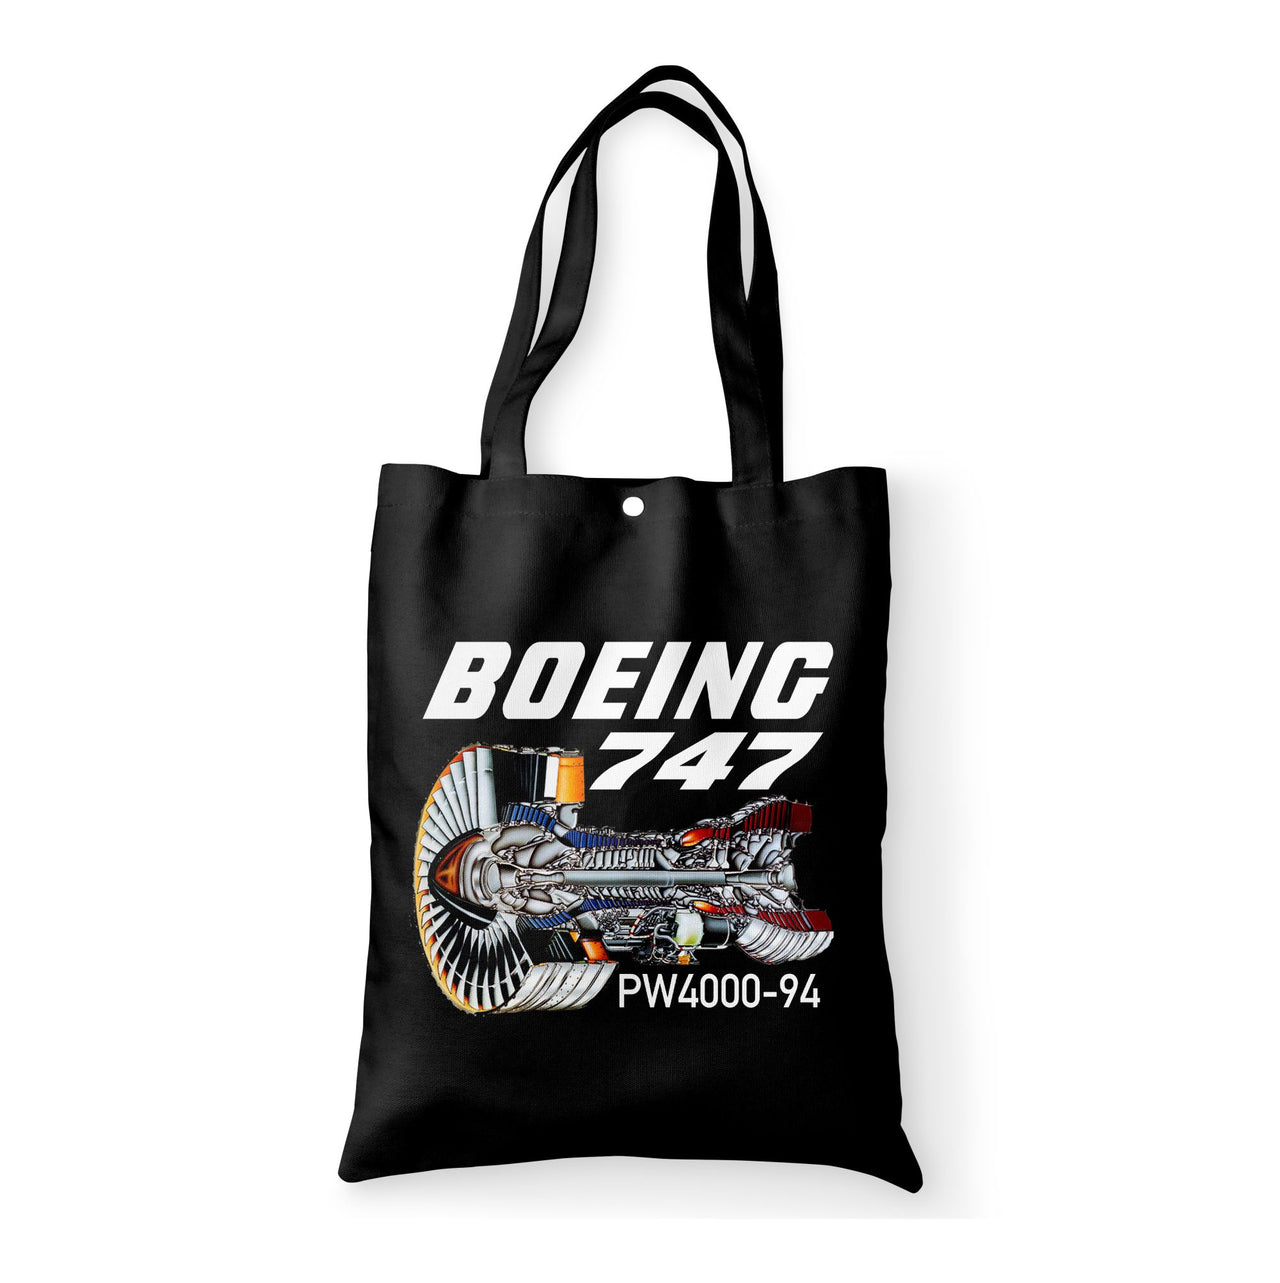 Boeing 747 & PW4000-94 Engine Designed Tote Bags